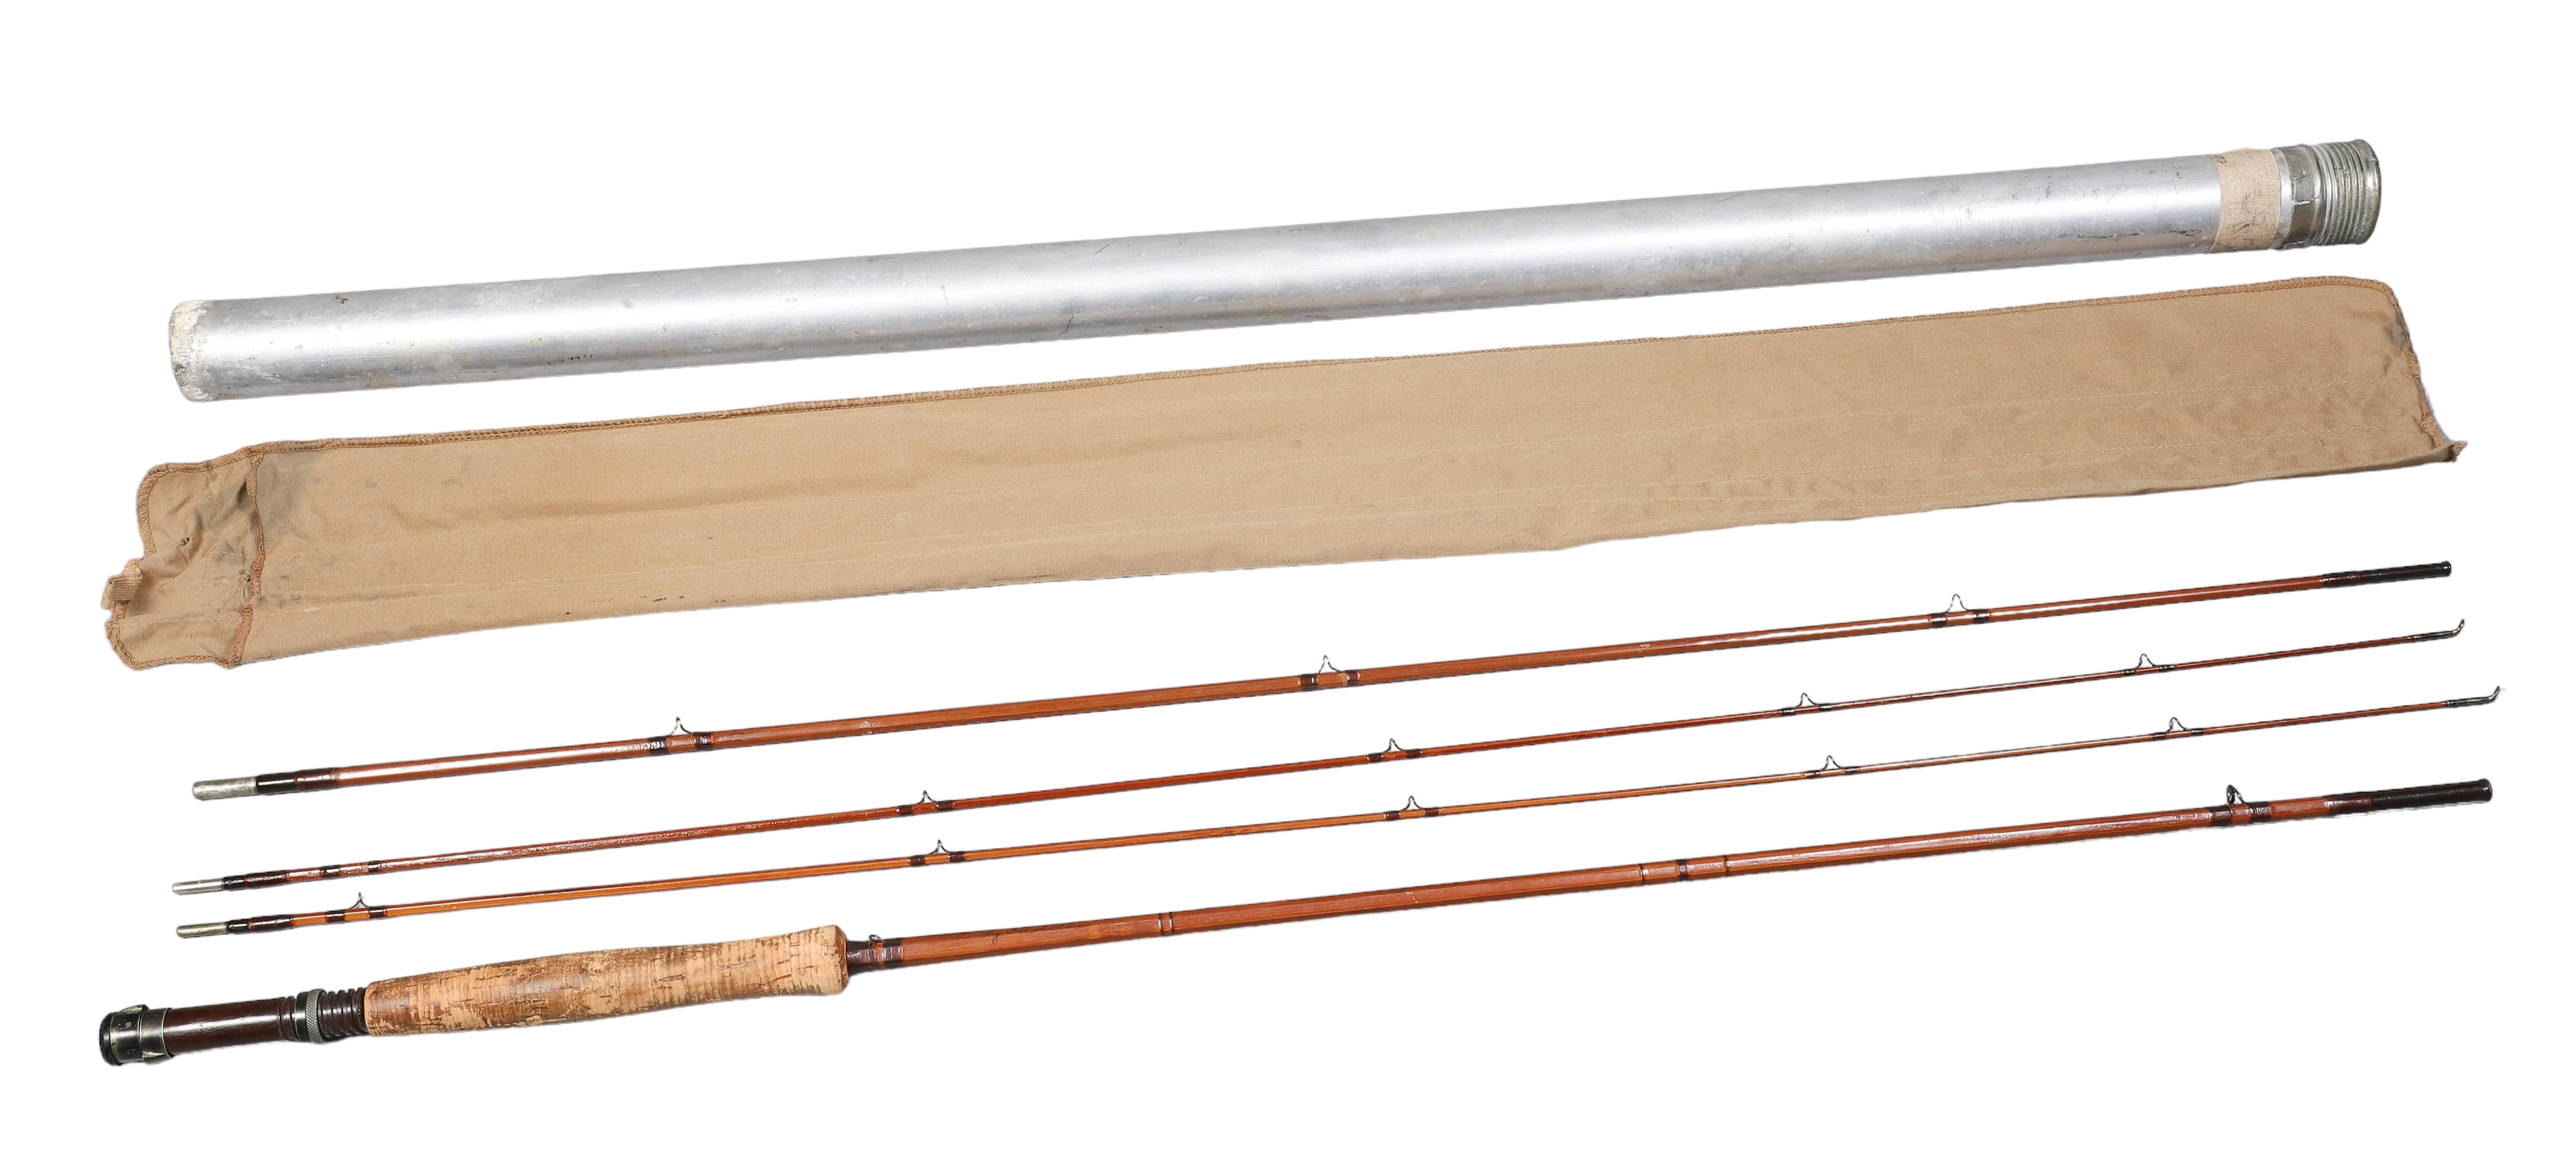 Bamboo 4-part fly rod, with fabric bag